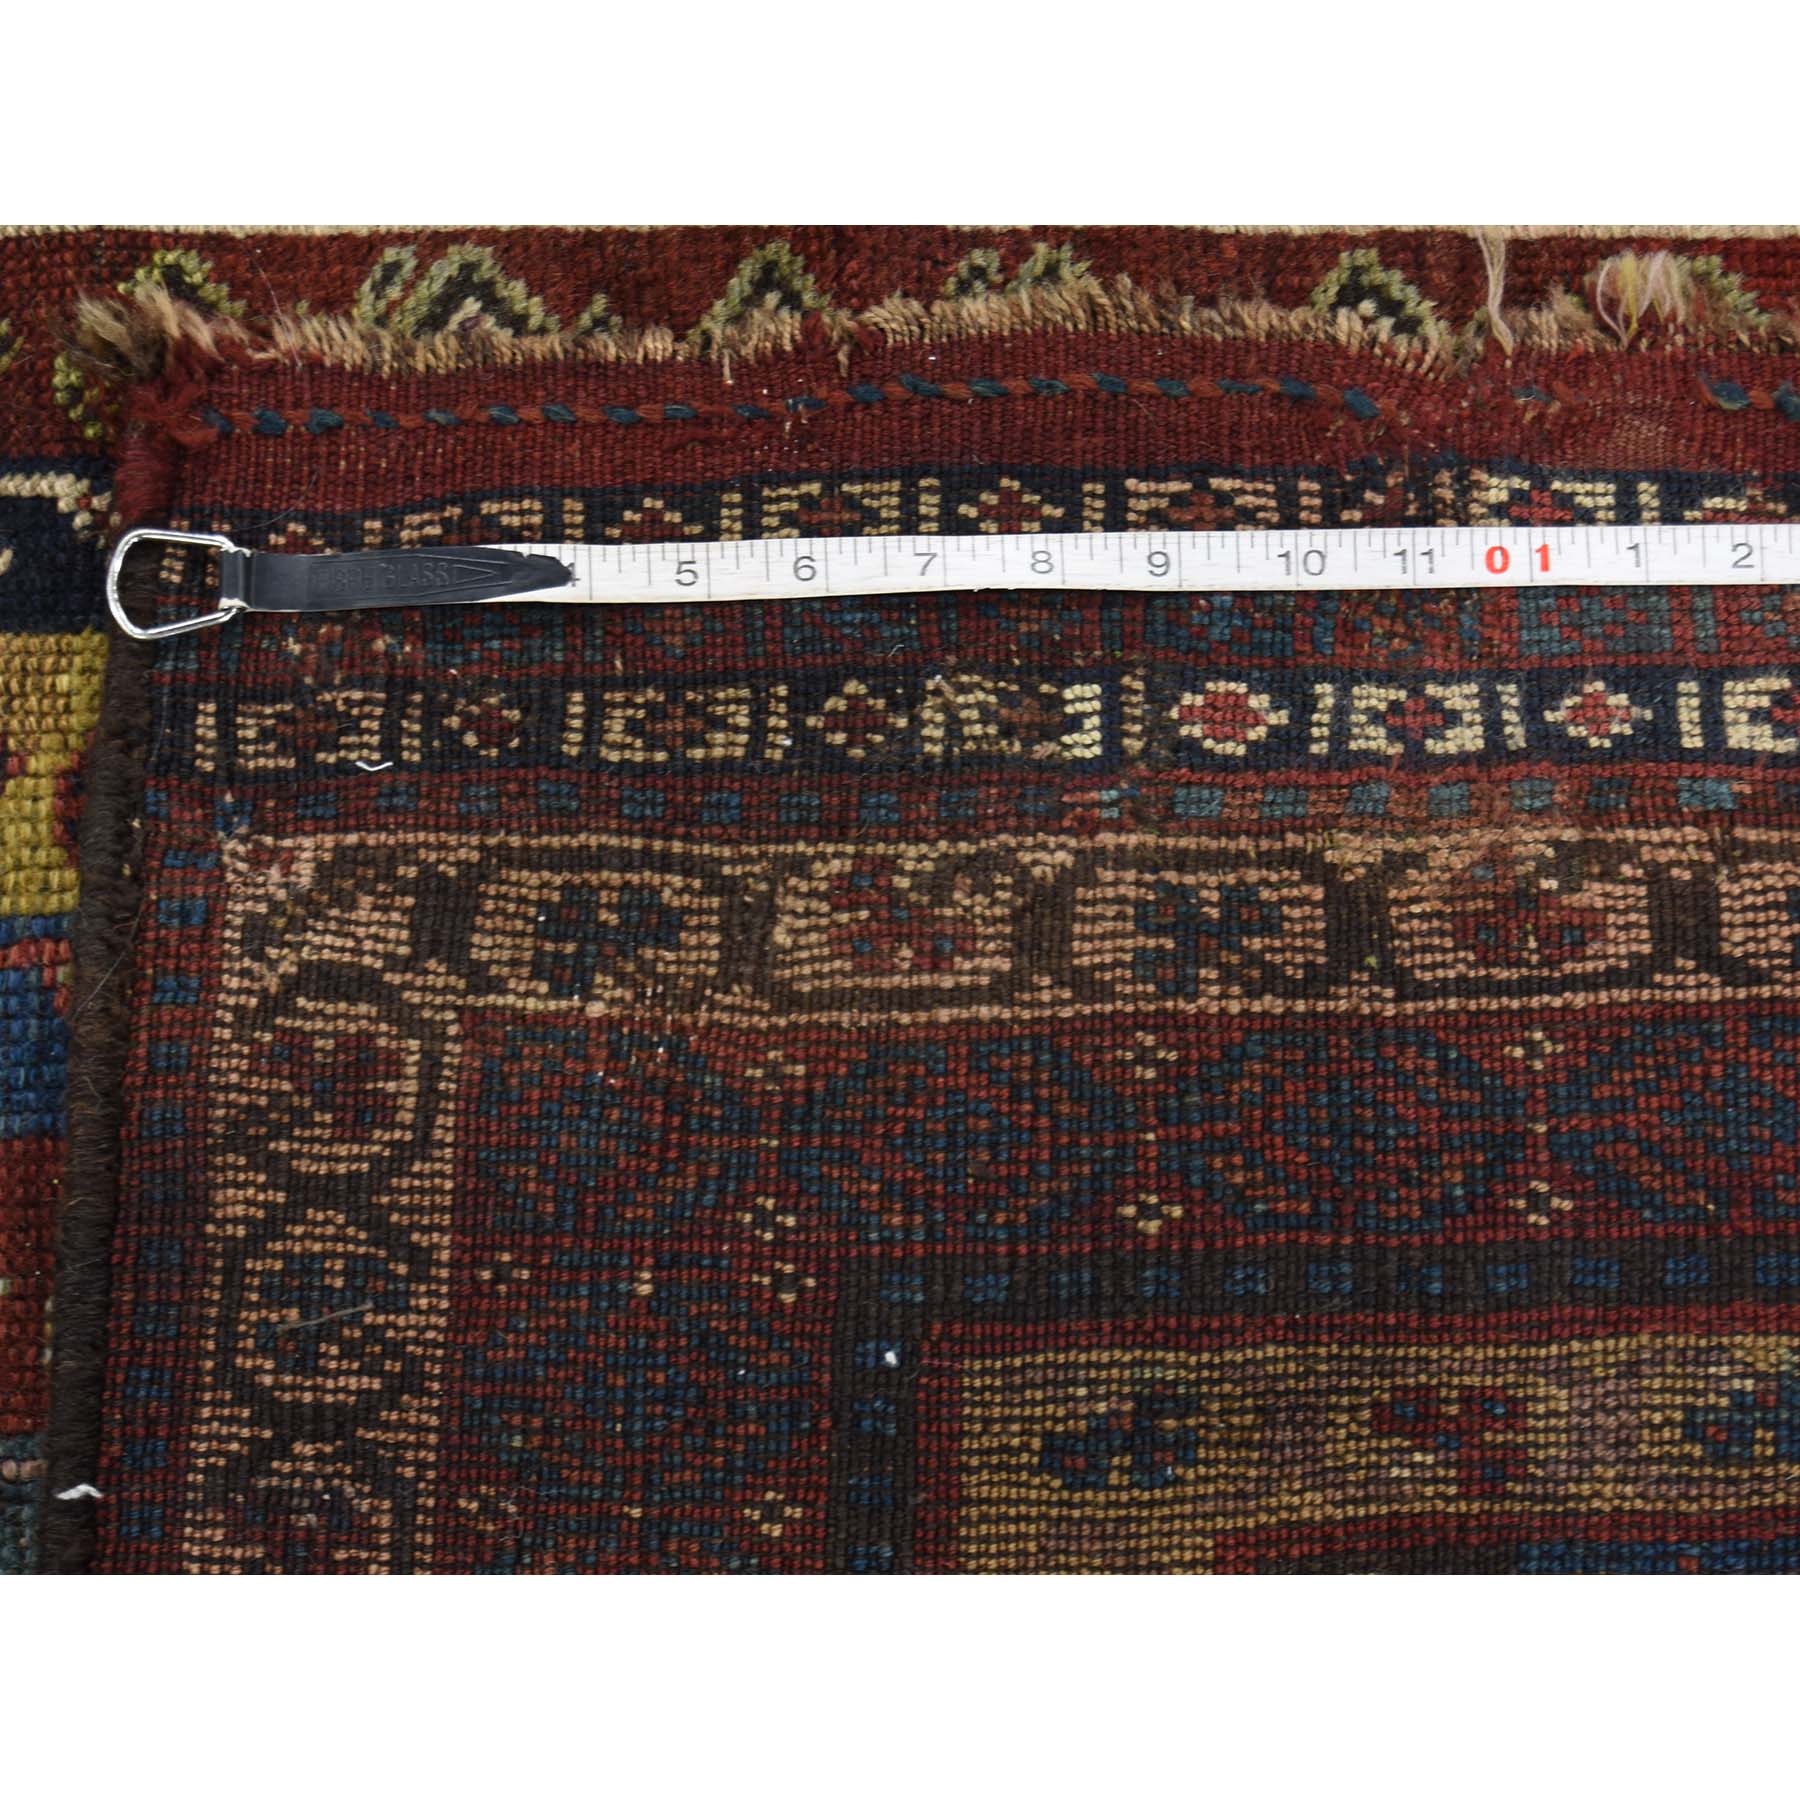 4'10"x11'8" Antique Persian Tribal Lori Buft With Shawl Design Wide Runner Hand Woven Oriental Rug 